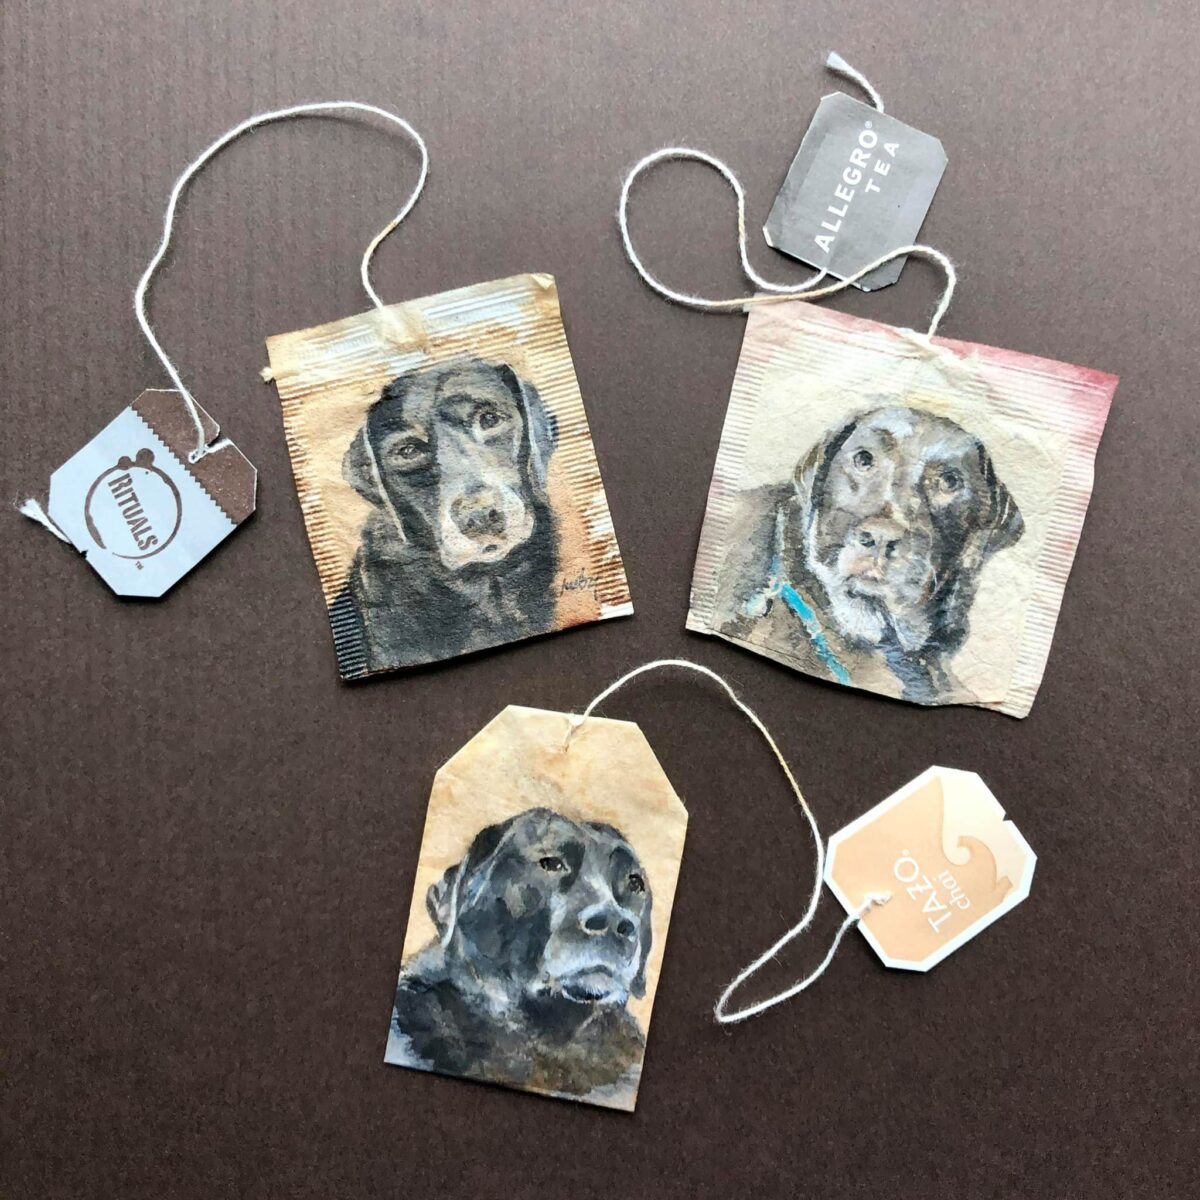 Gorgeous Miniature Watercolors Painted On Used Teabags By Ruby Silvious 1